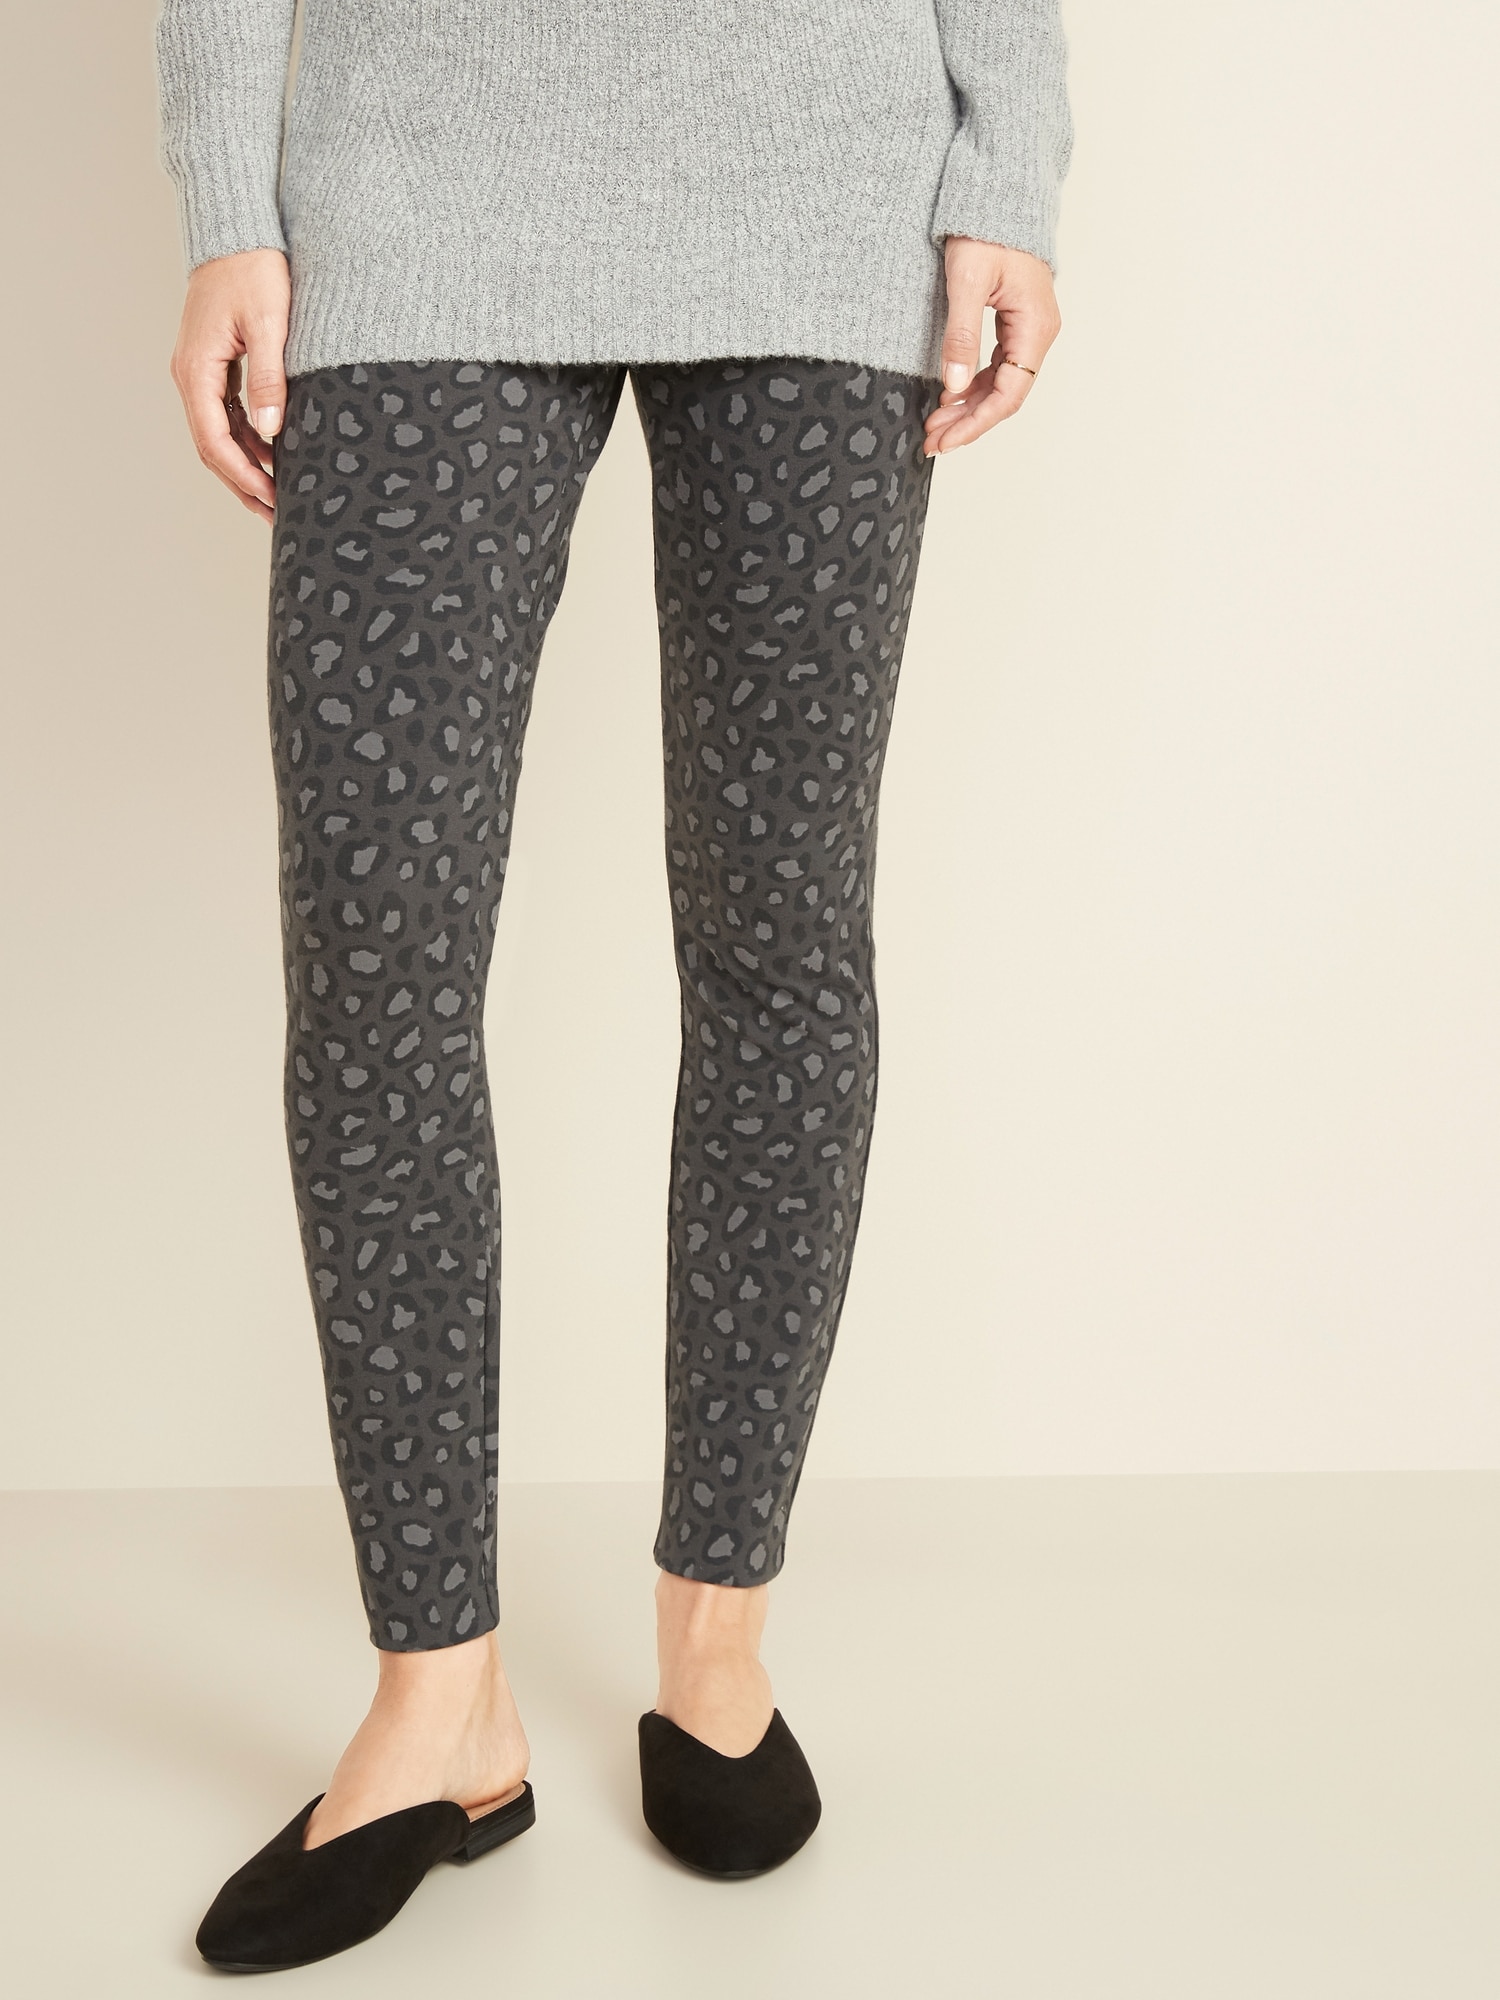 Old Navy Mid-Rise Printed Jersey Leggings for Women - 285352403000